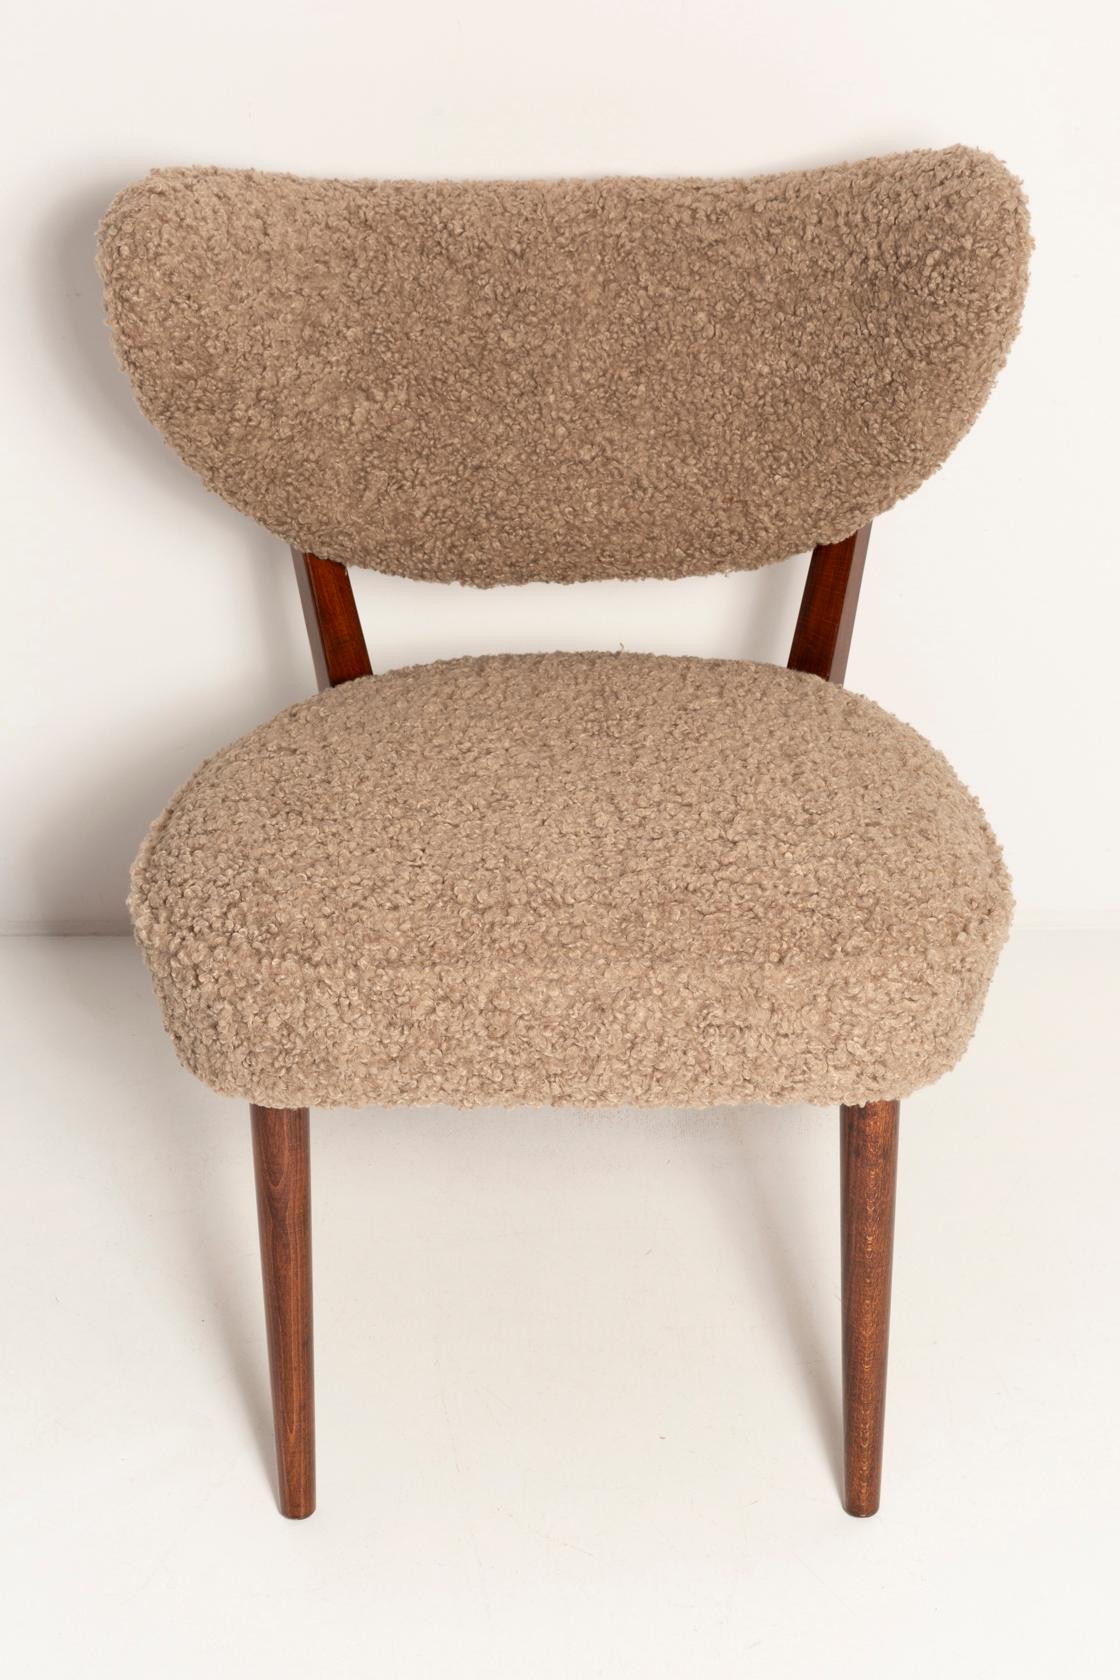 Pair of Beige Boucle Shell Club Chairs, by Vintola Studio, Europe, Poland For Sale 7